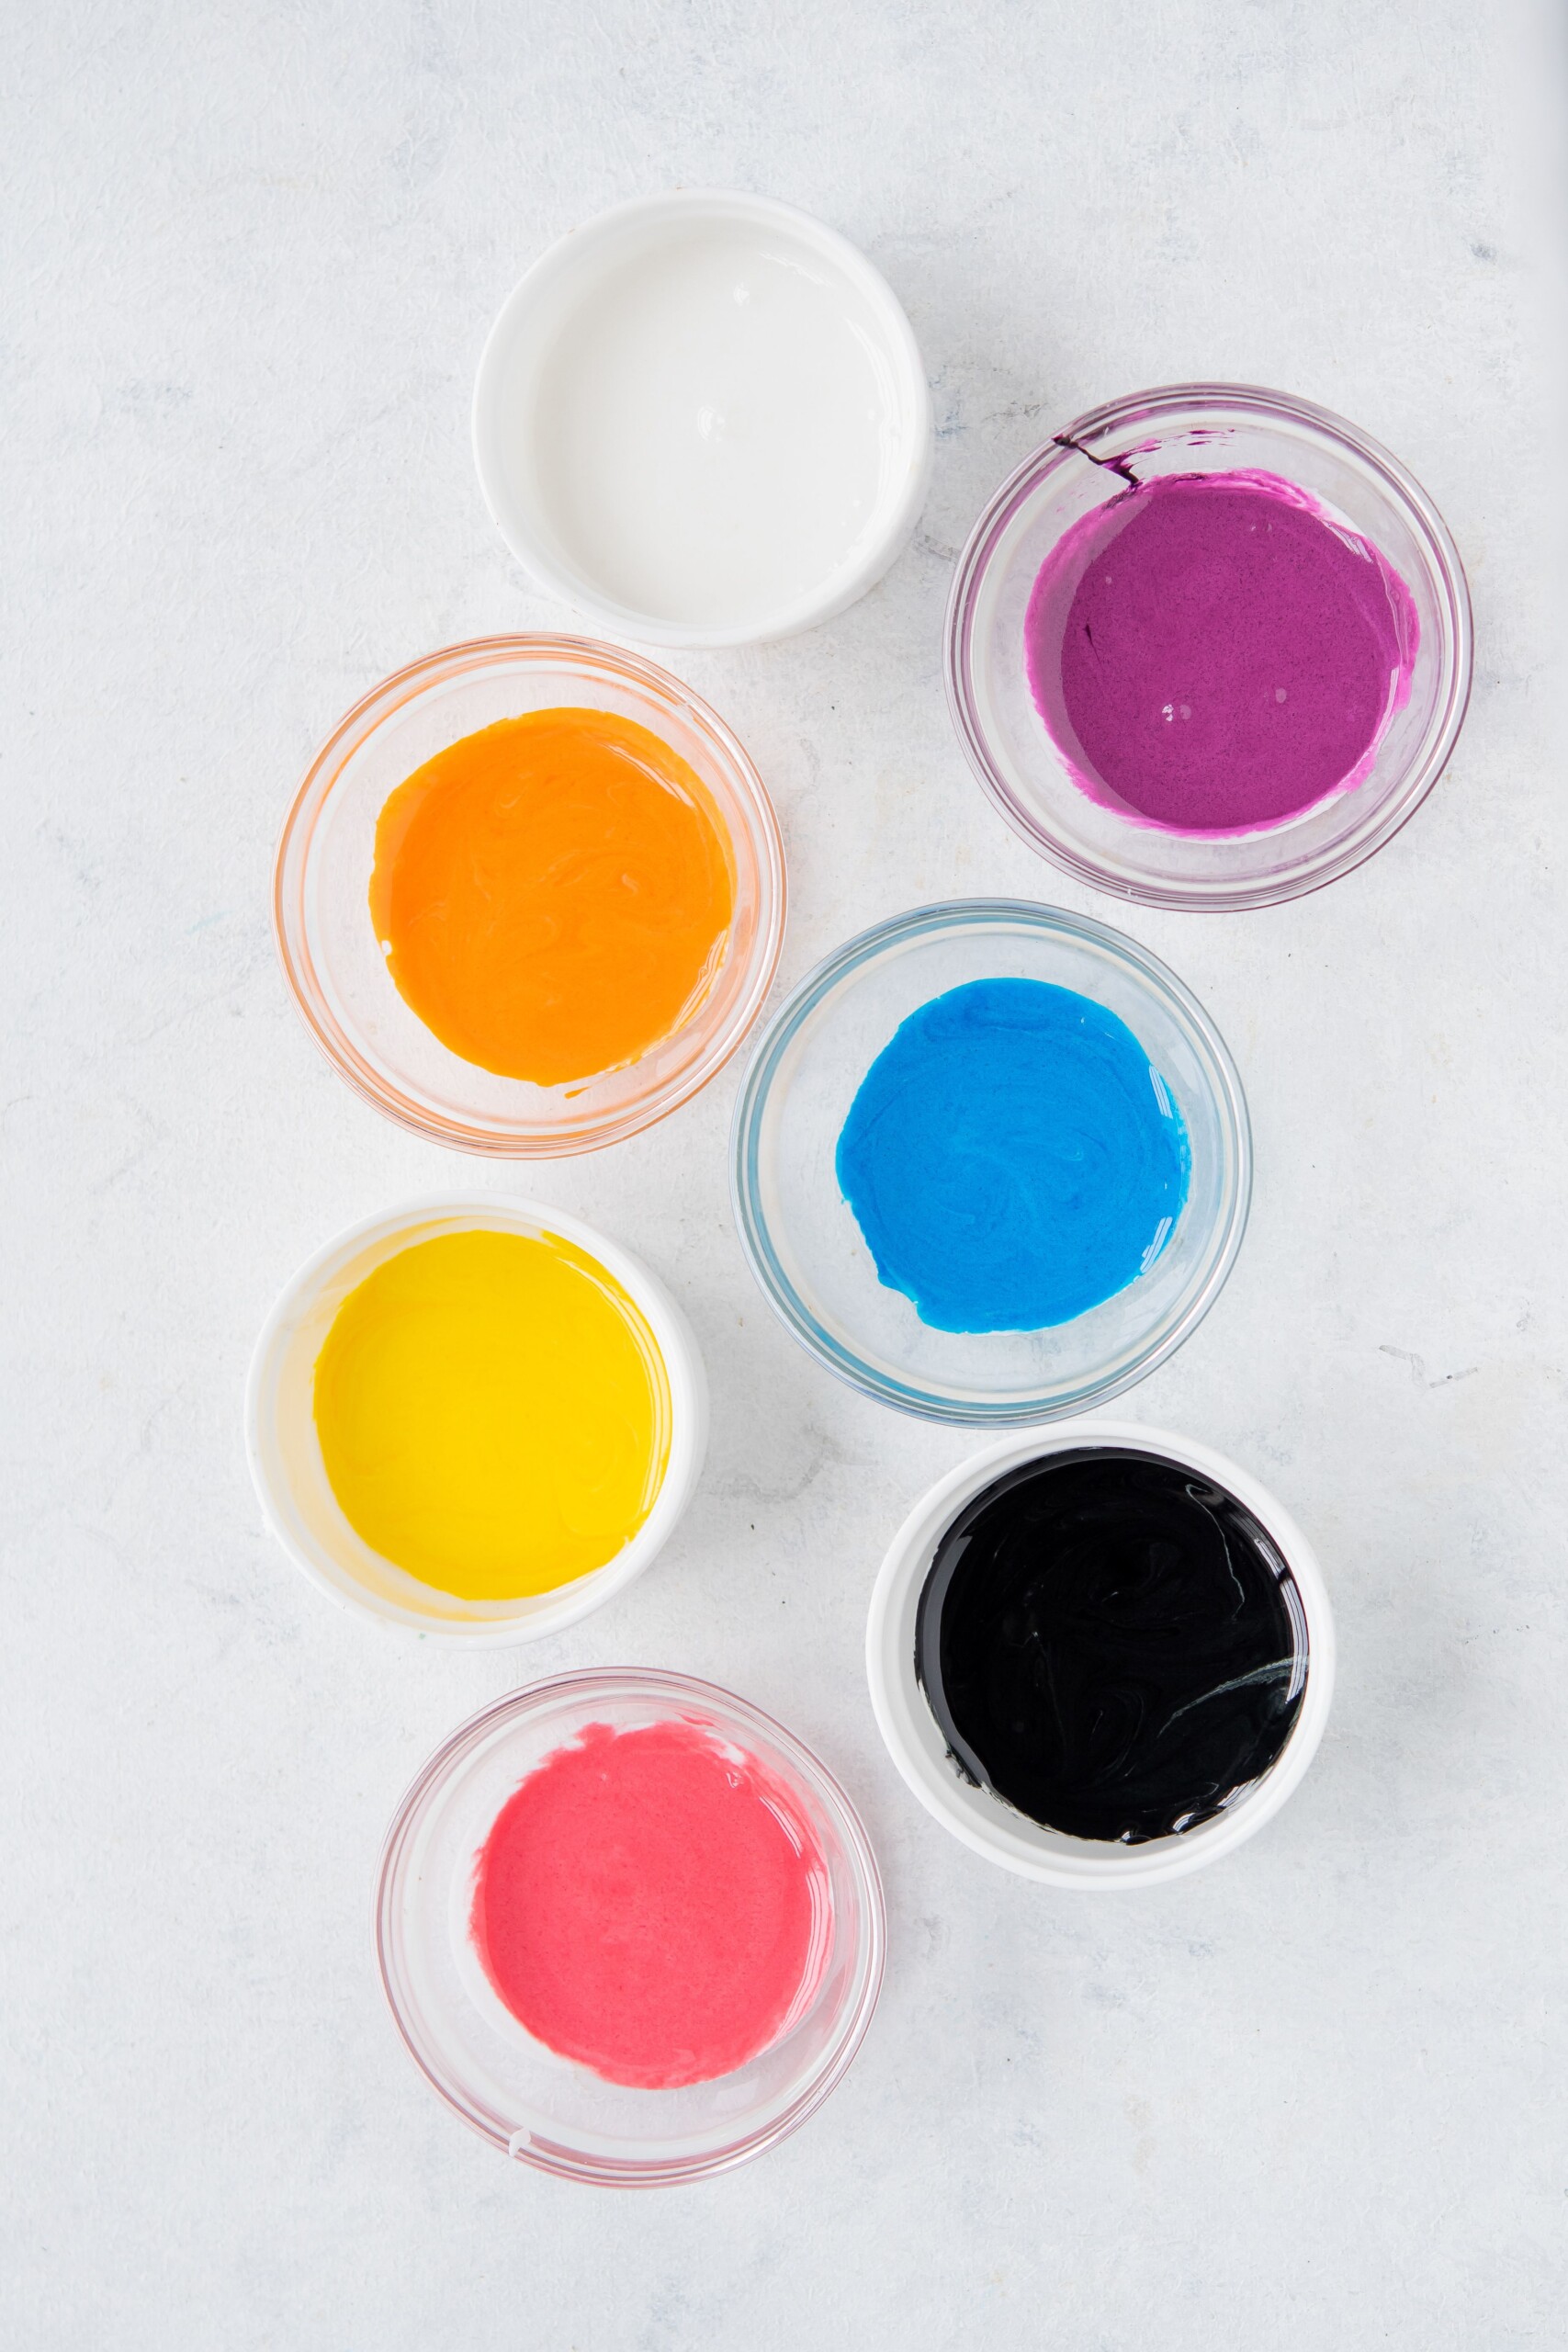 Royal icing in bright colors in small glass bowls